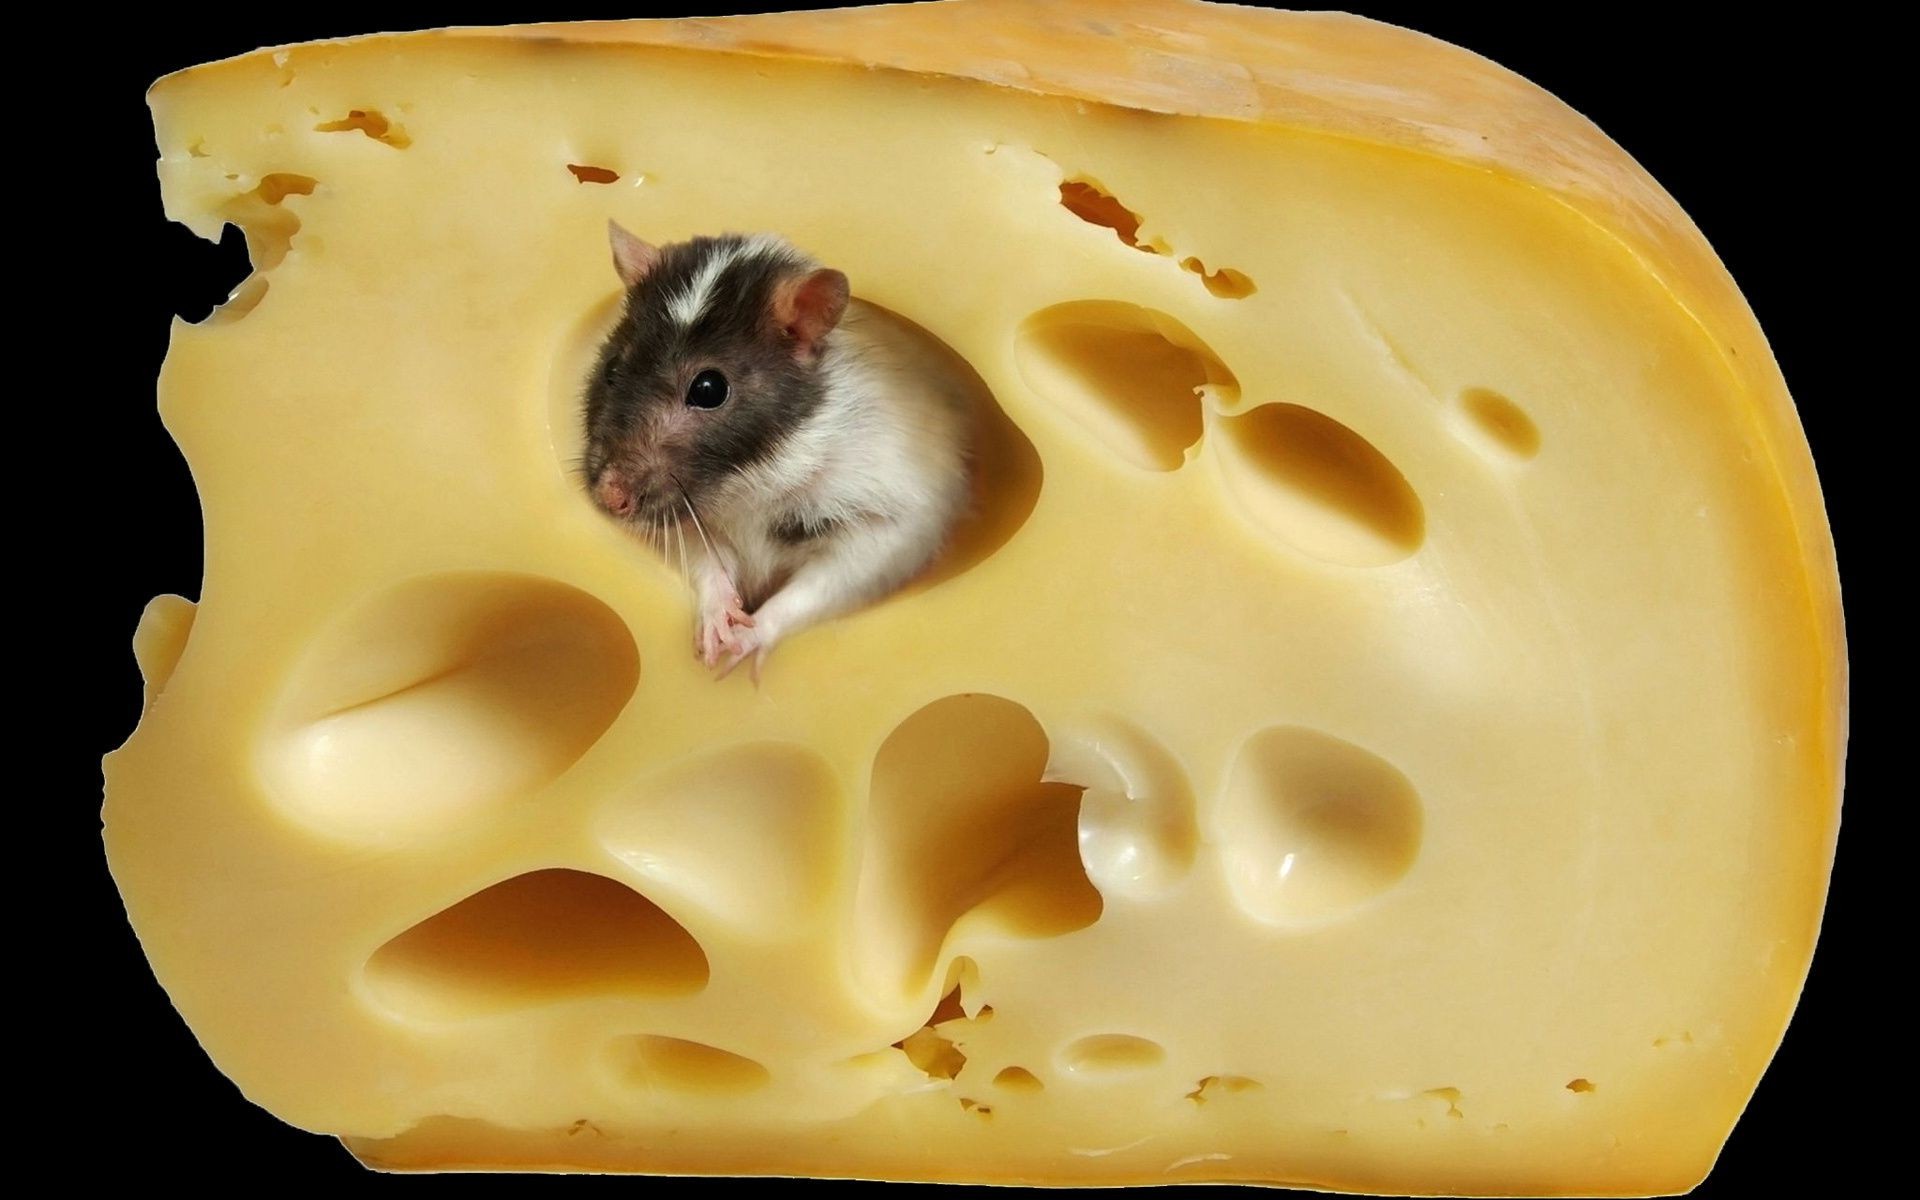 animals cheese food milk dairy one slice dairy product breakfast rodent delicious mouse meal refreshment